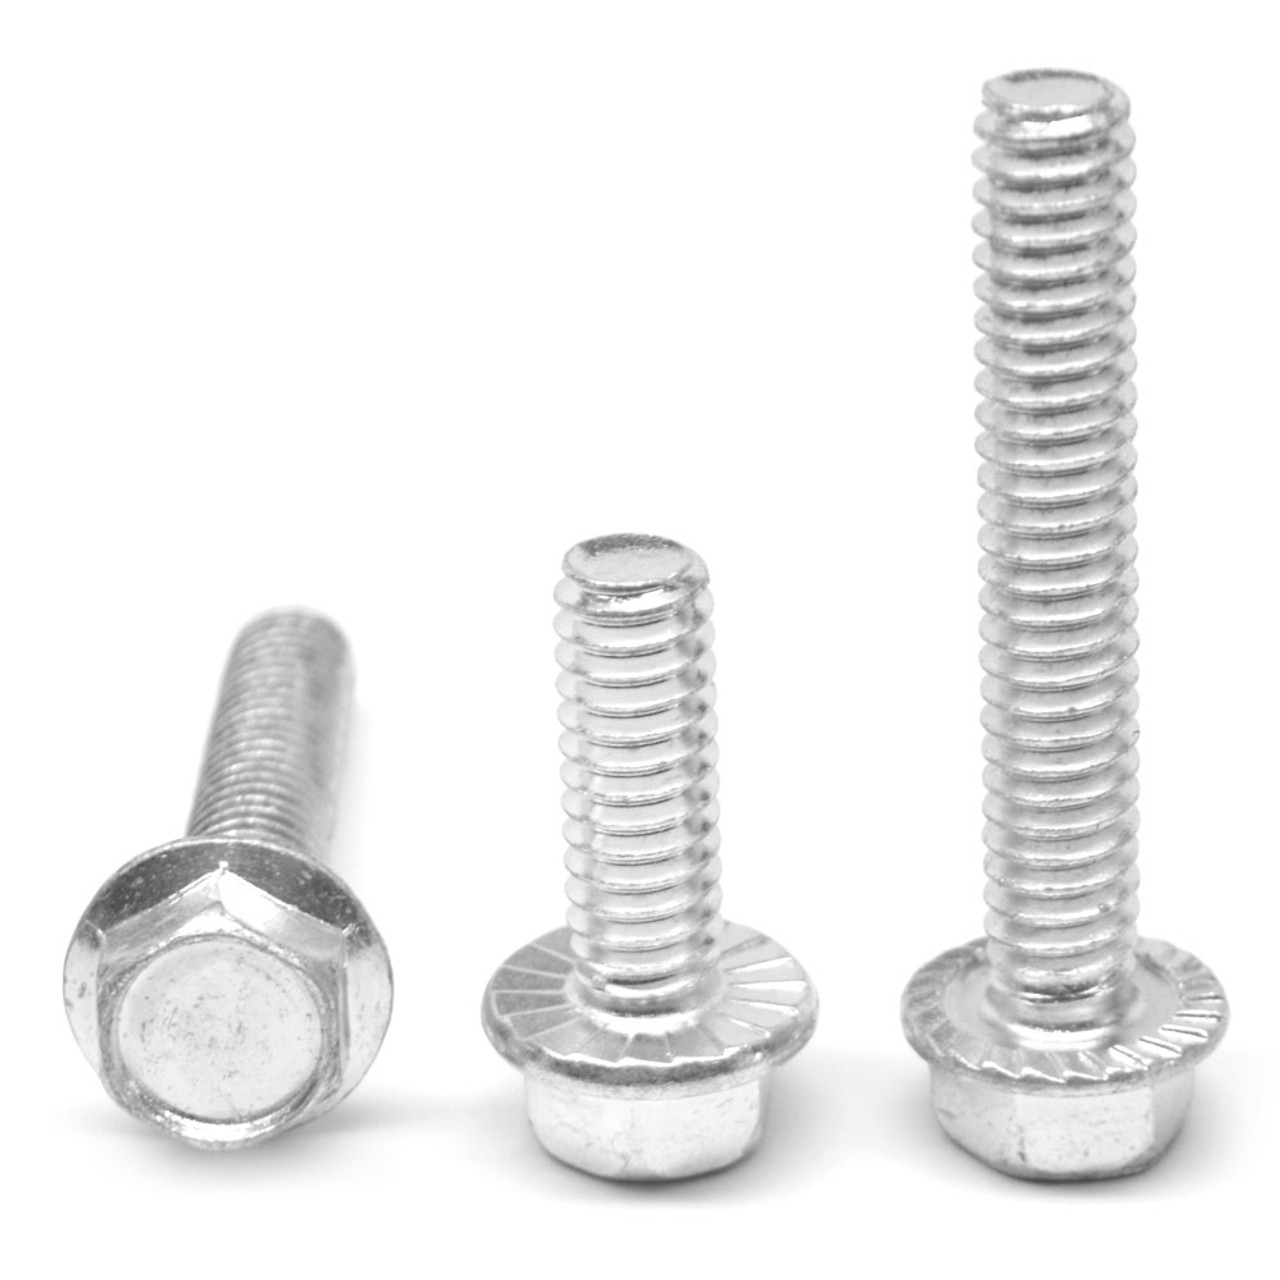 #8-32 x 1" (FT) Coarse Thread Hex Flange Screw with Serration Case Hardened Low Carbon Steel Zinc Plated